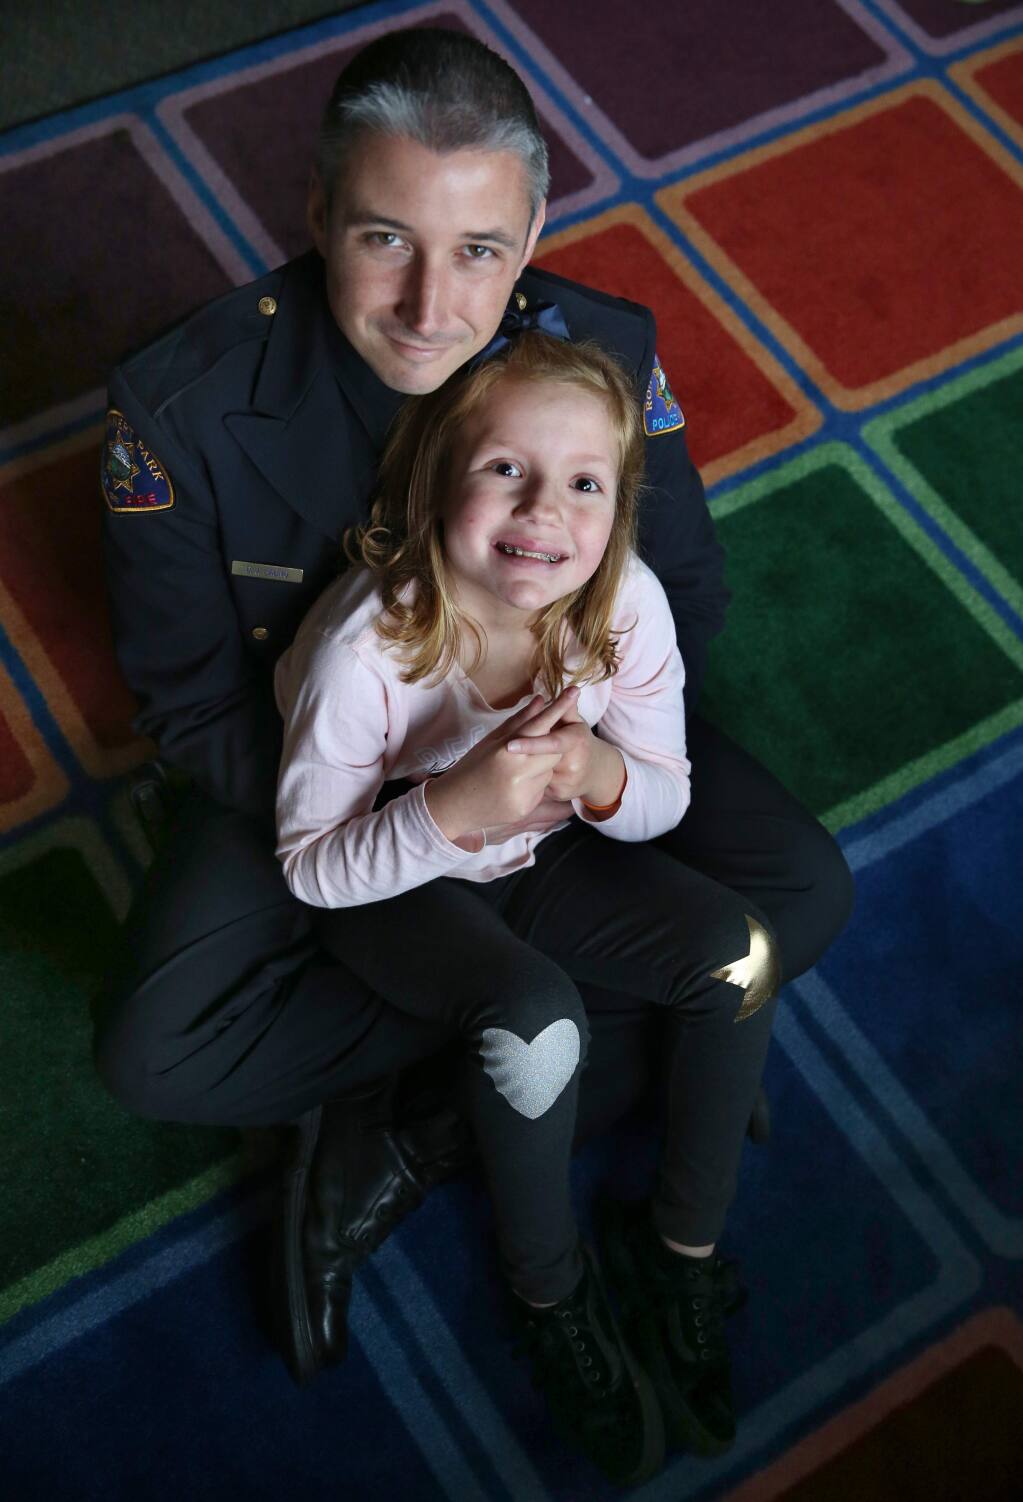 Rohnert Park police detective Duaine Labno with his step-daughter Madison Galvez, 9, who has autism at John Reed Elementary School on Wednesday, January 16, 2019 in Rohnert Park, California . (BETH SCHLANKER/The Press Democrat)